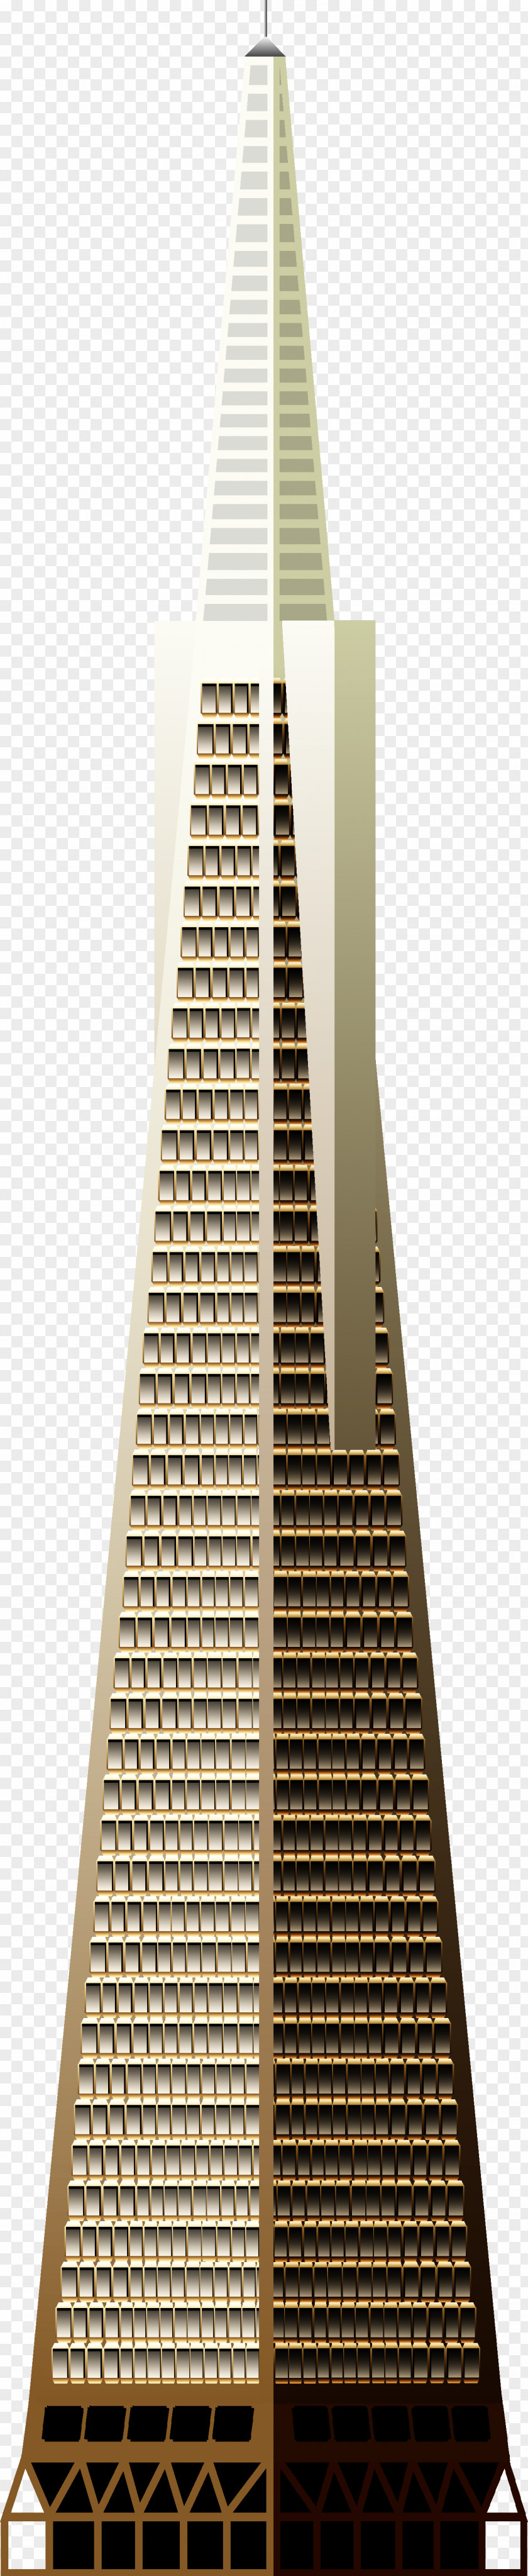 Pyramid Transamerica Coit Tower Building Skyscraper Drawing PNG